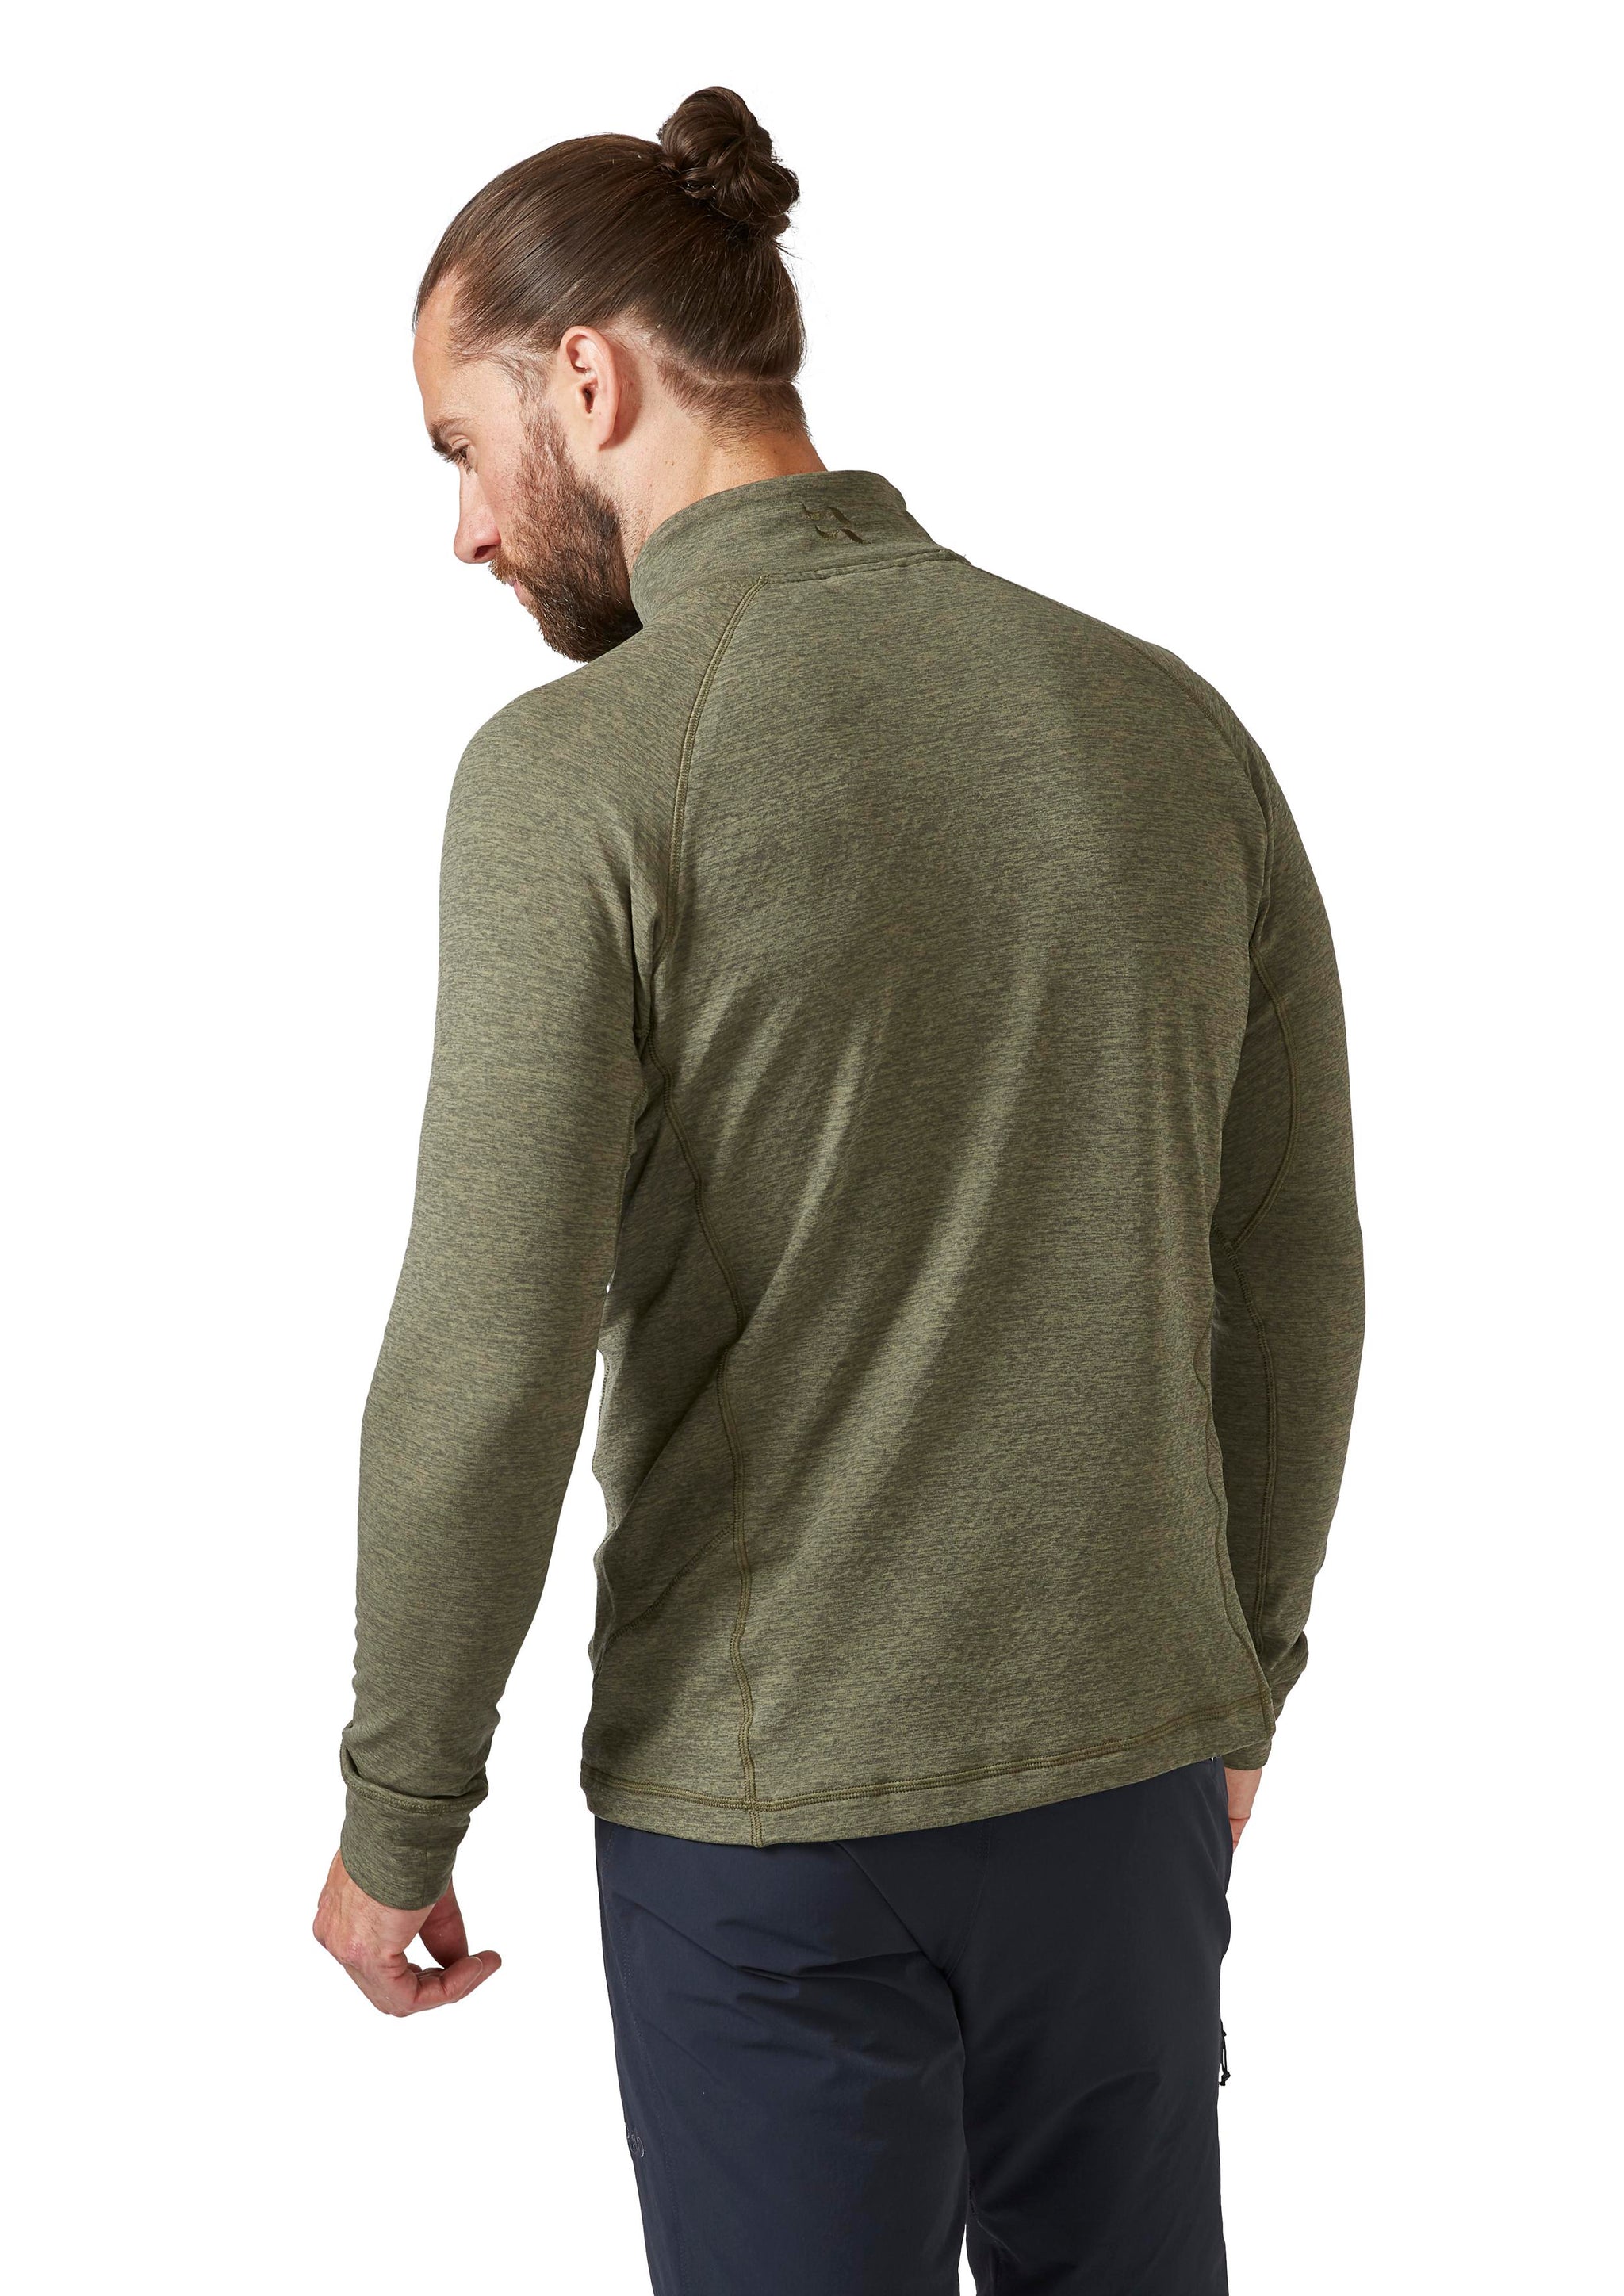 Rab Men's Nexus Pull-On - Outfitters Store